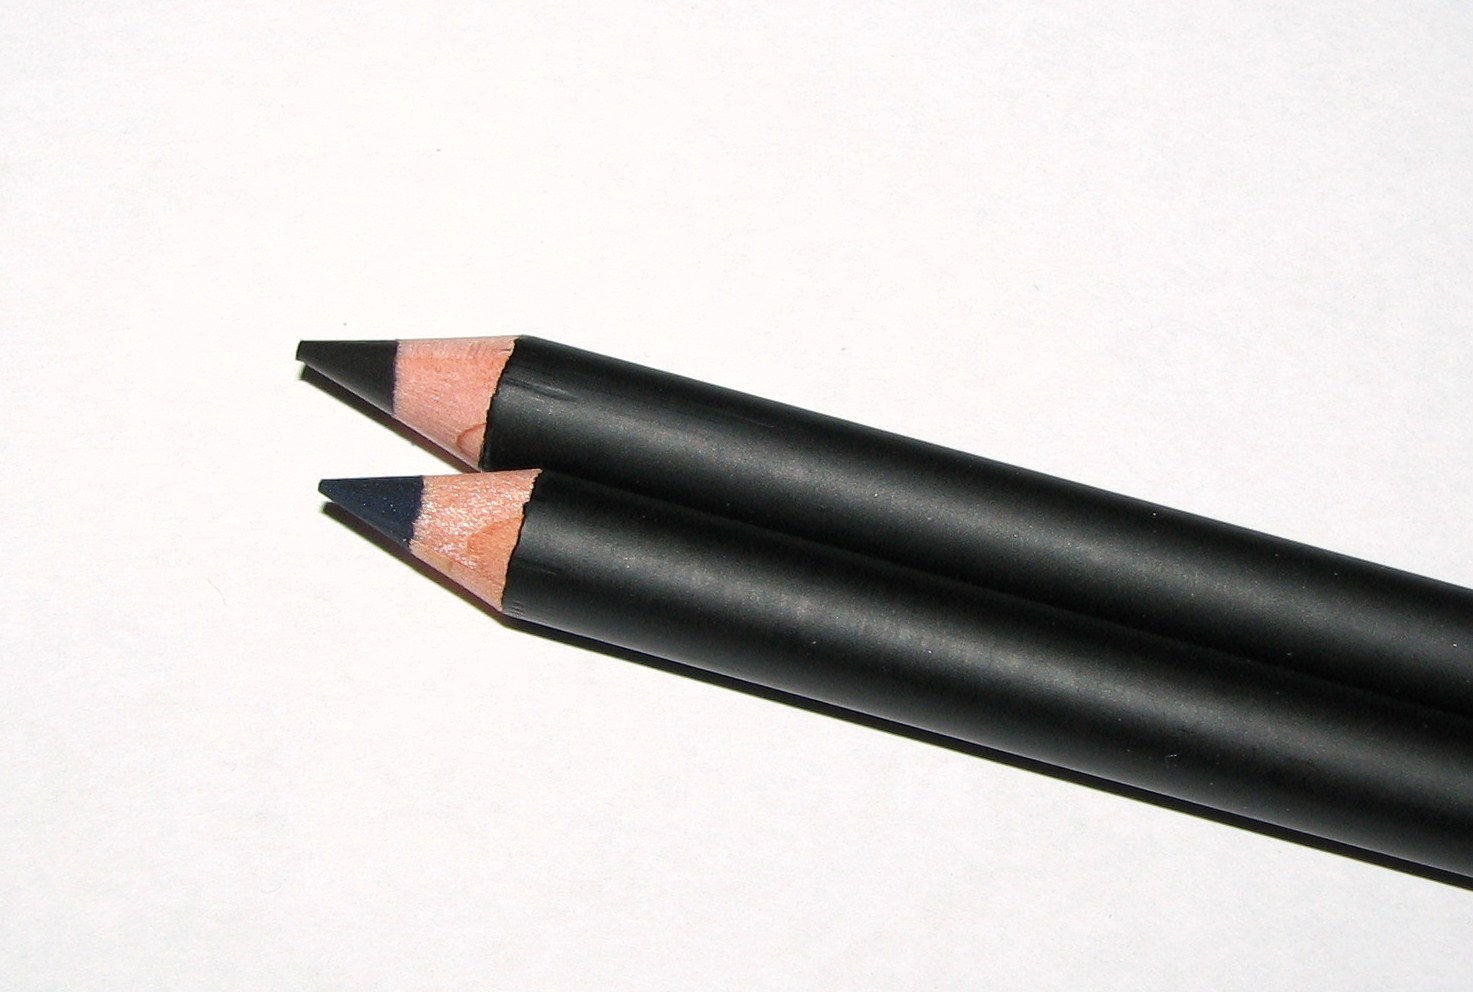 NOIR and MARINE Le Crayon Kohl Eye Pencil Swatches Review - Blushing Noir